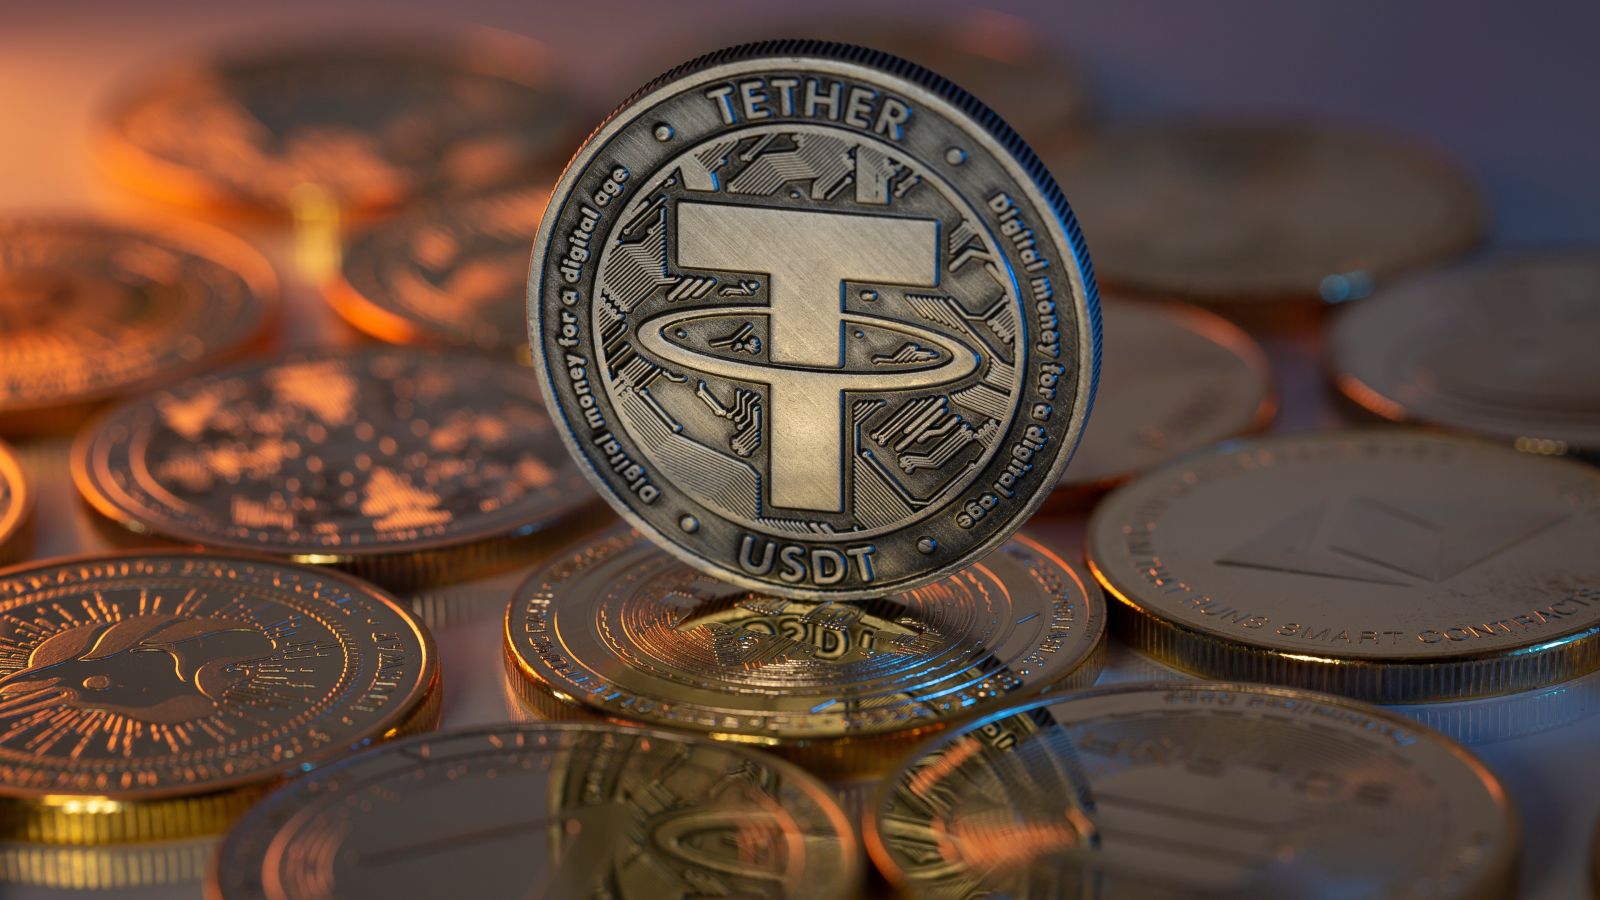 Crypto - Tether USDT Cryptocurrency Physical Coin - by Diamond Visuals via Shutterstock